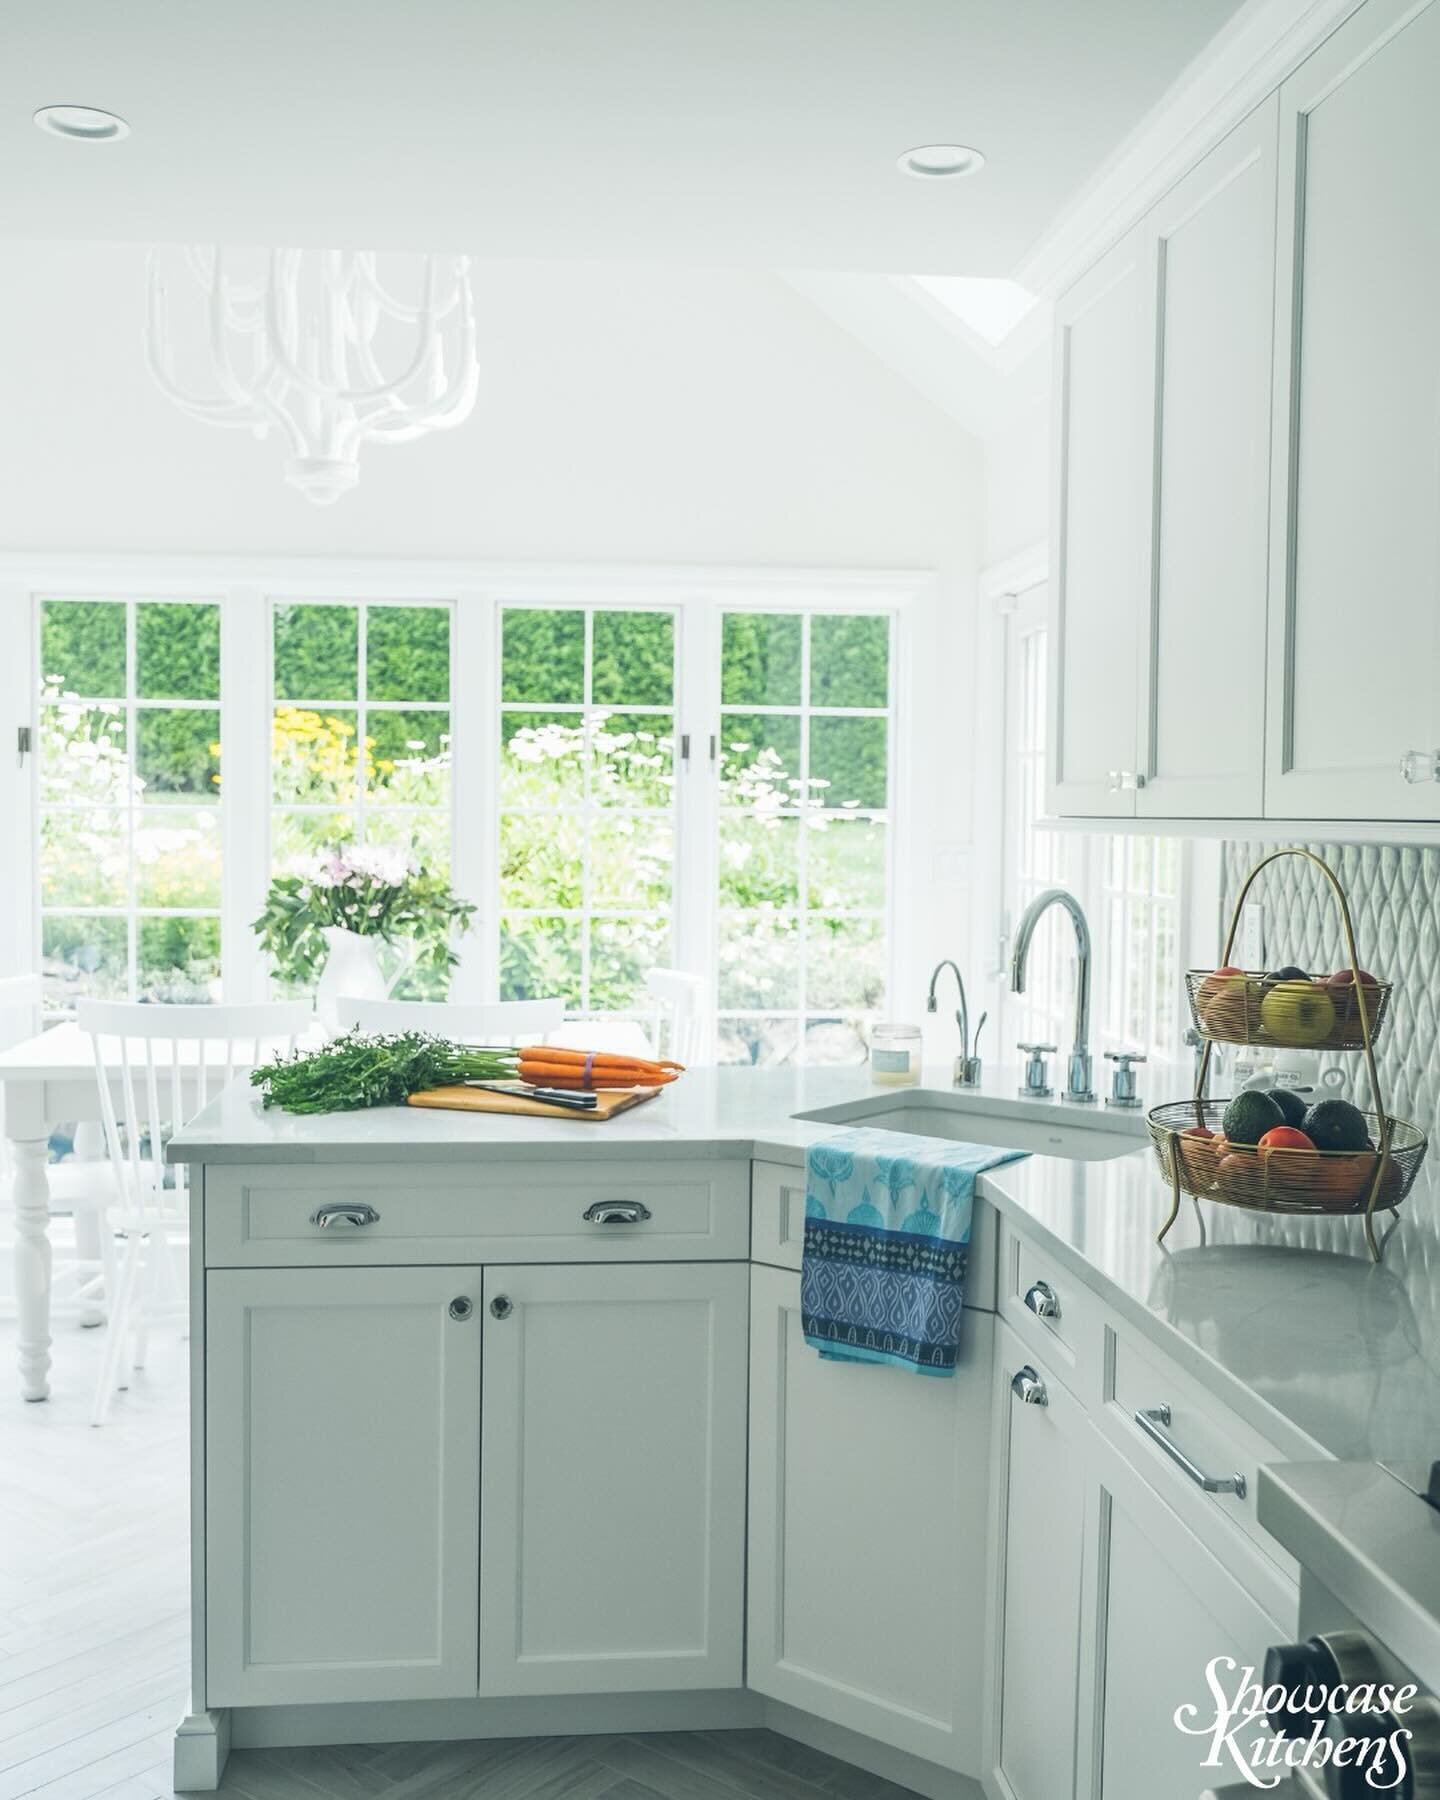 Spring has sprung! 💐 Time for your kitchen to start defrosting for the warm weather! This gorgeous space is reminding us of the beauty that comes with a new season. 

  Kitchen design, John Starck 
Interior design, JNR Designs 
Contractor, Old World